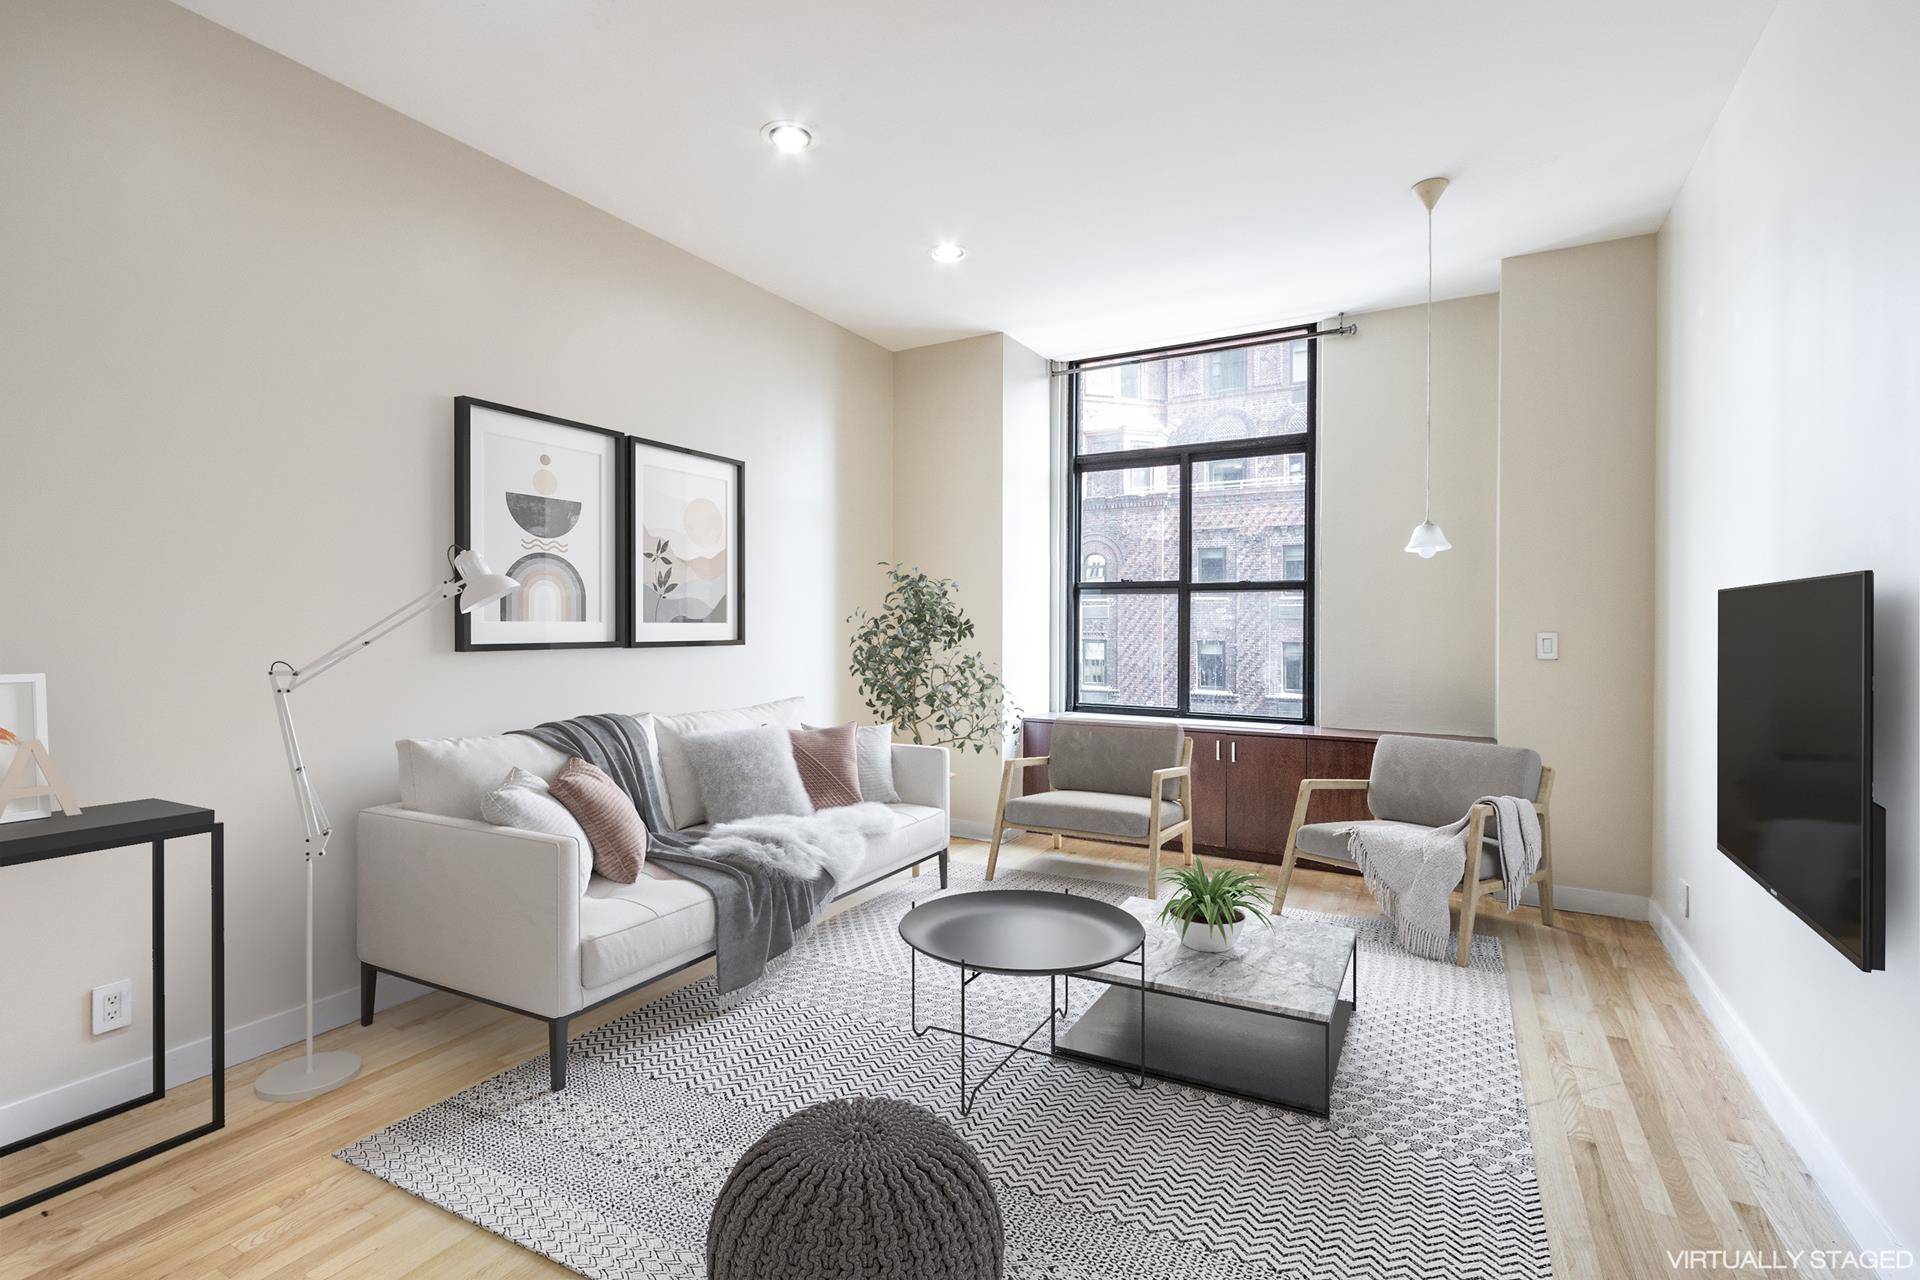 Located in the heart of Midtown, this unique loft like Studio has been recently updated with an oversized bathroom, hardwood floors in great condition and a wonderful open floor plan.